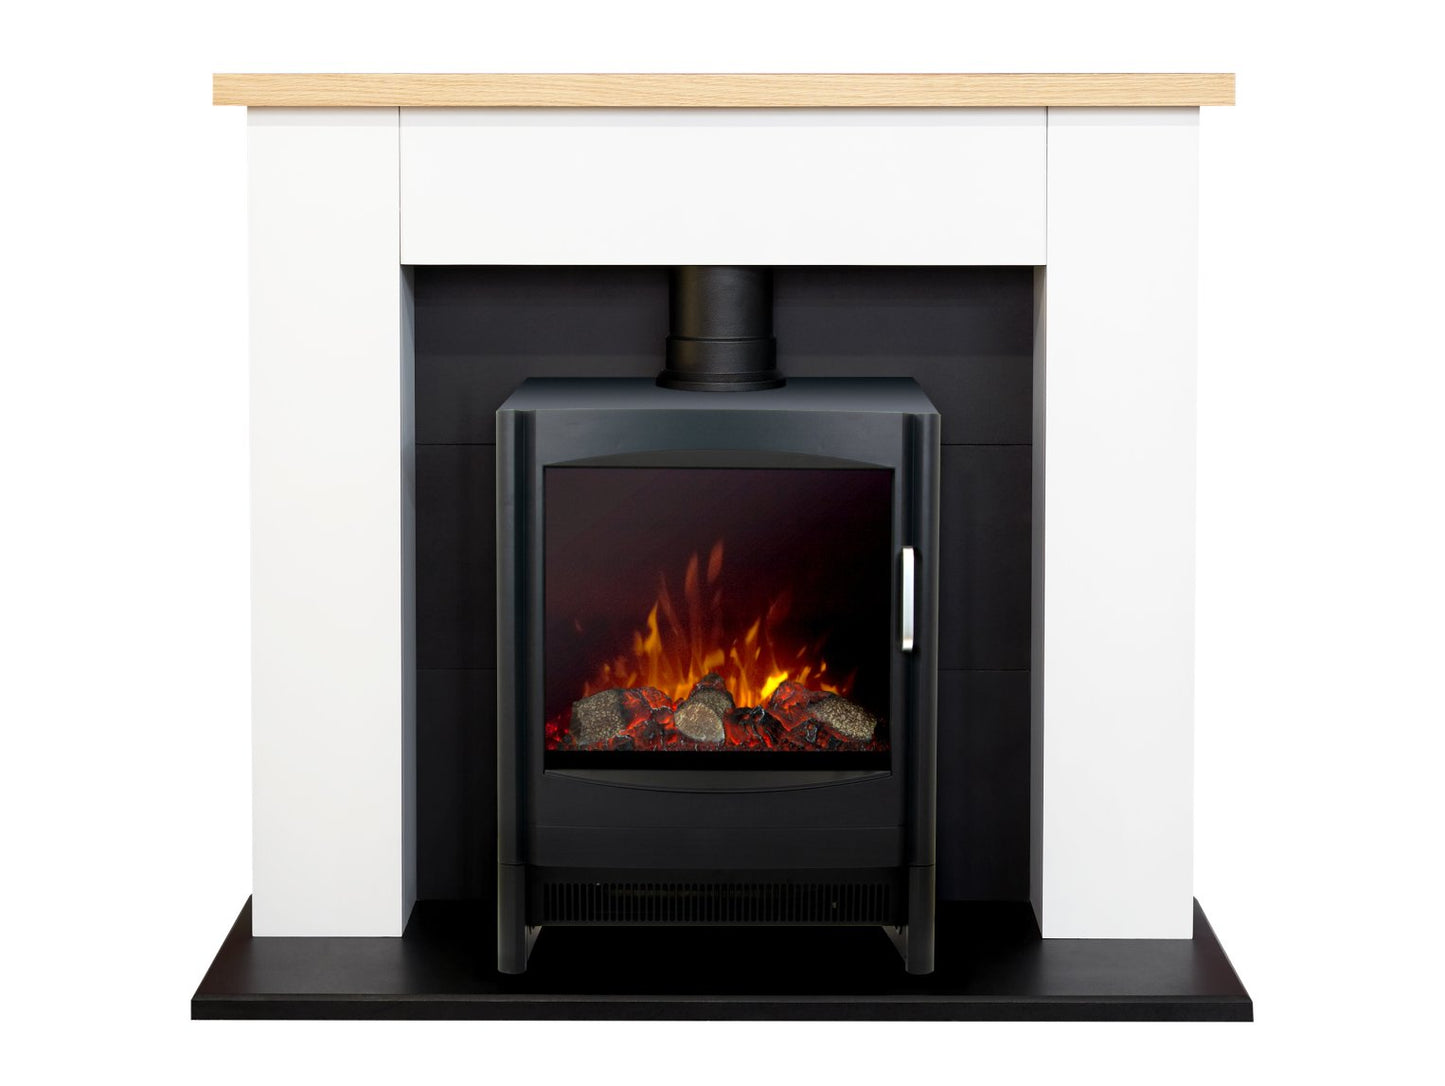 Adam Chester Fireplace in Pure White with Keston Electric Stove in Black, 39 Inch